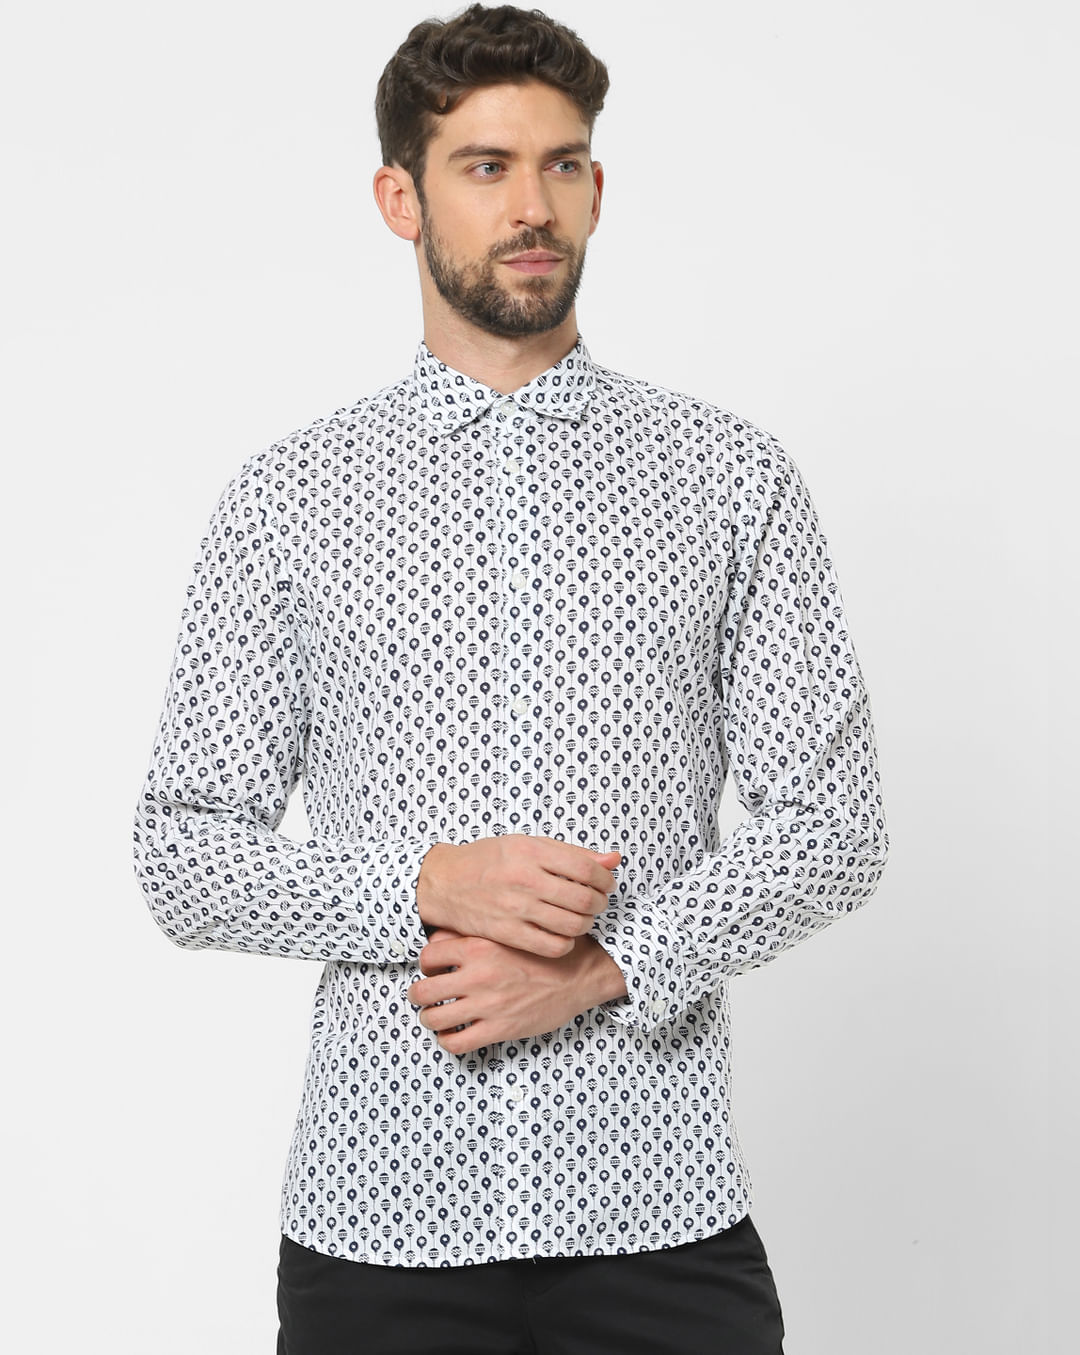 SELECTED HOMME White Floral Printed Organic Cotton Full Sleeves Shirt